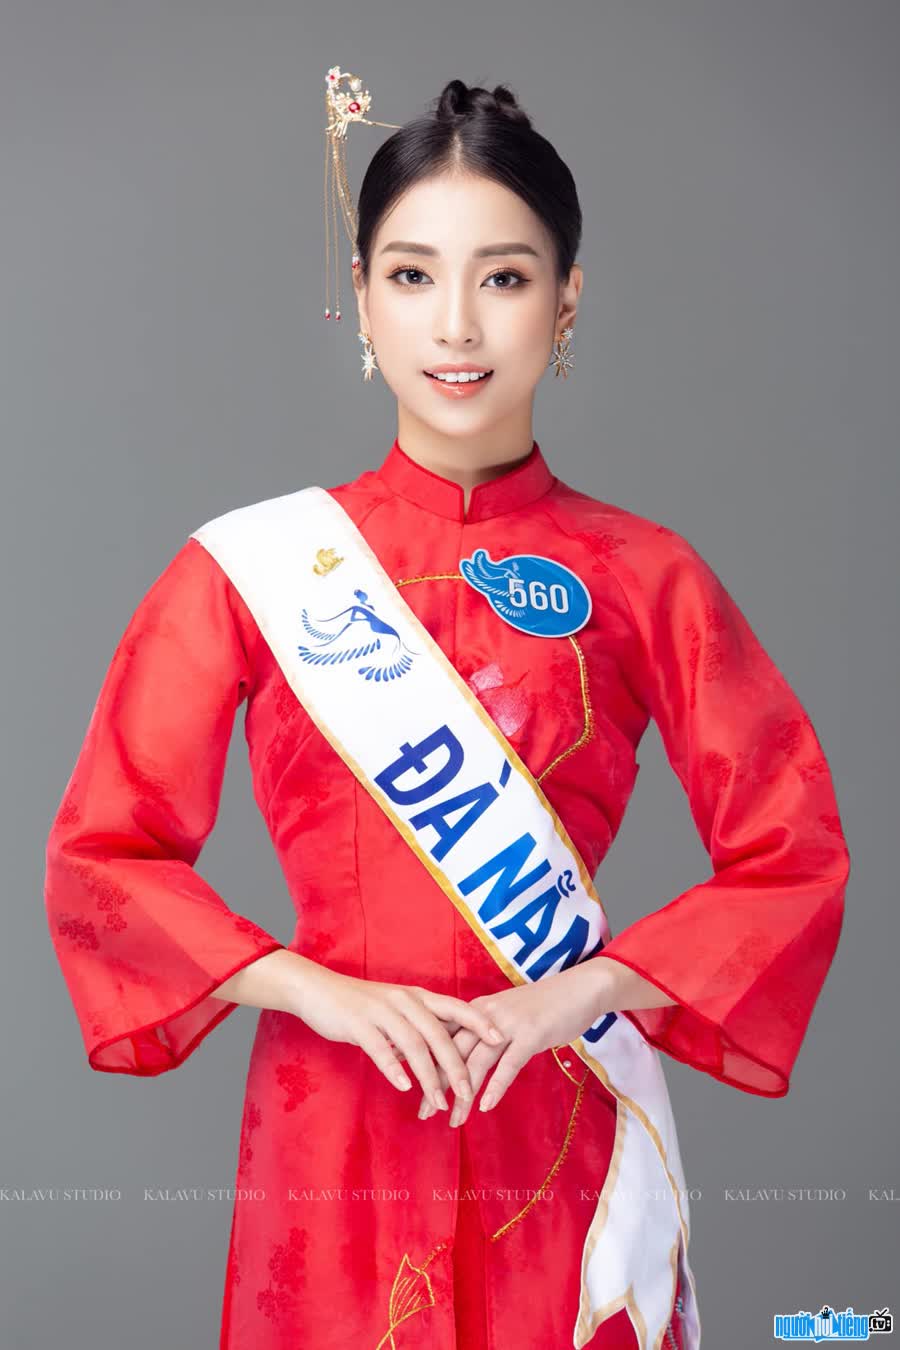 Nhat Le has achieved many good achievements in beauty contests